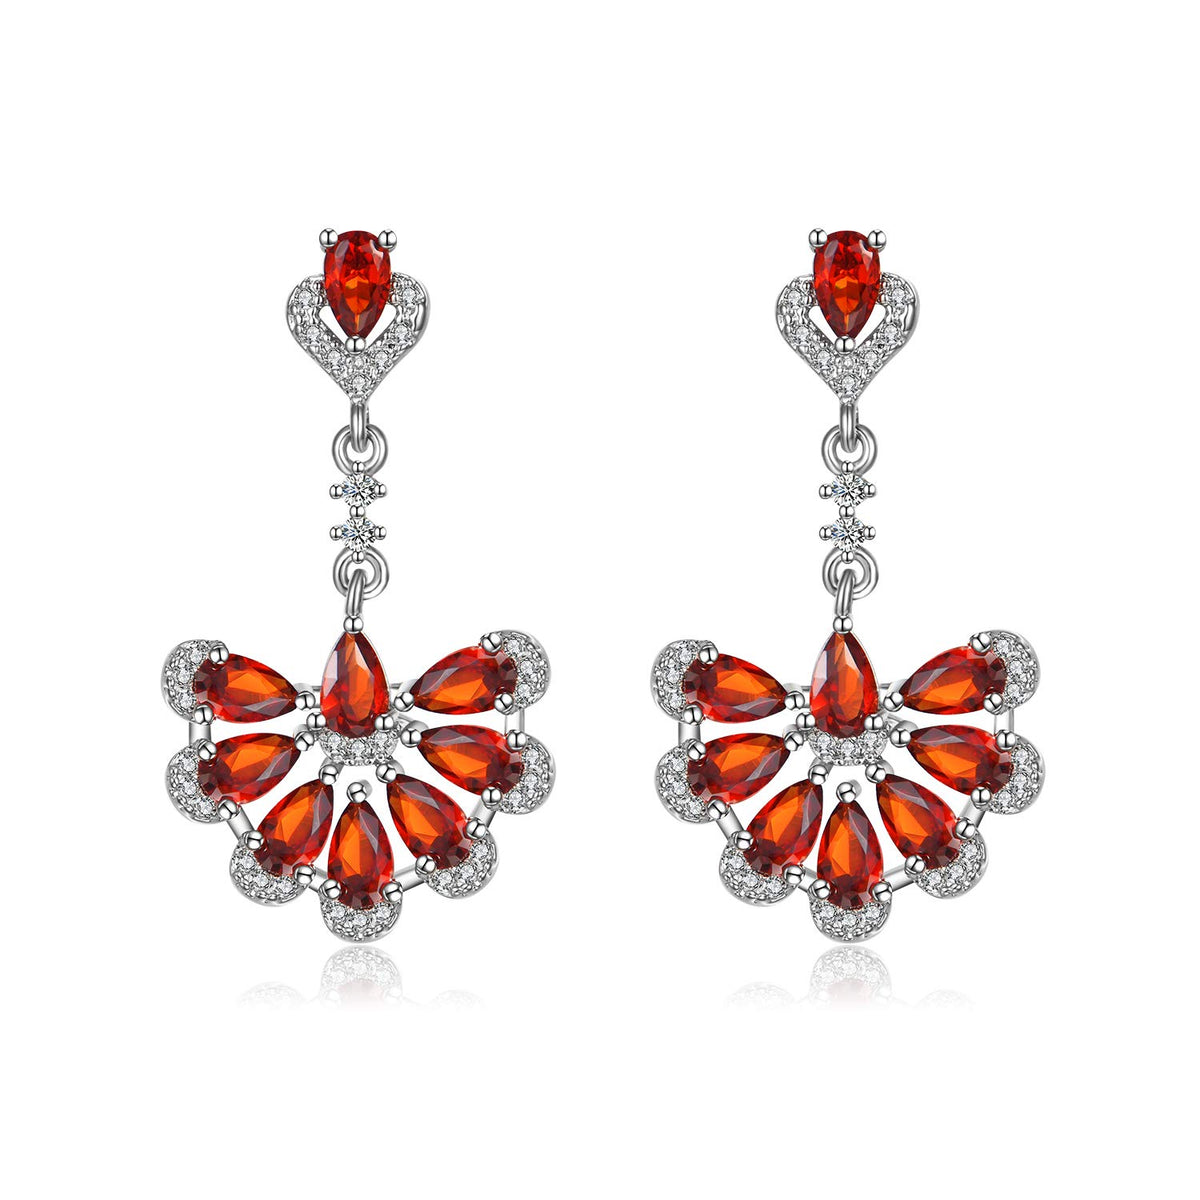 Yellow Chimes Elegant Latest Fashion Silver Plated Red Crystal designer Drop Earrings for Women and Girls (Red)